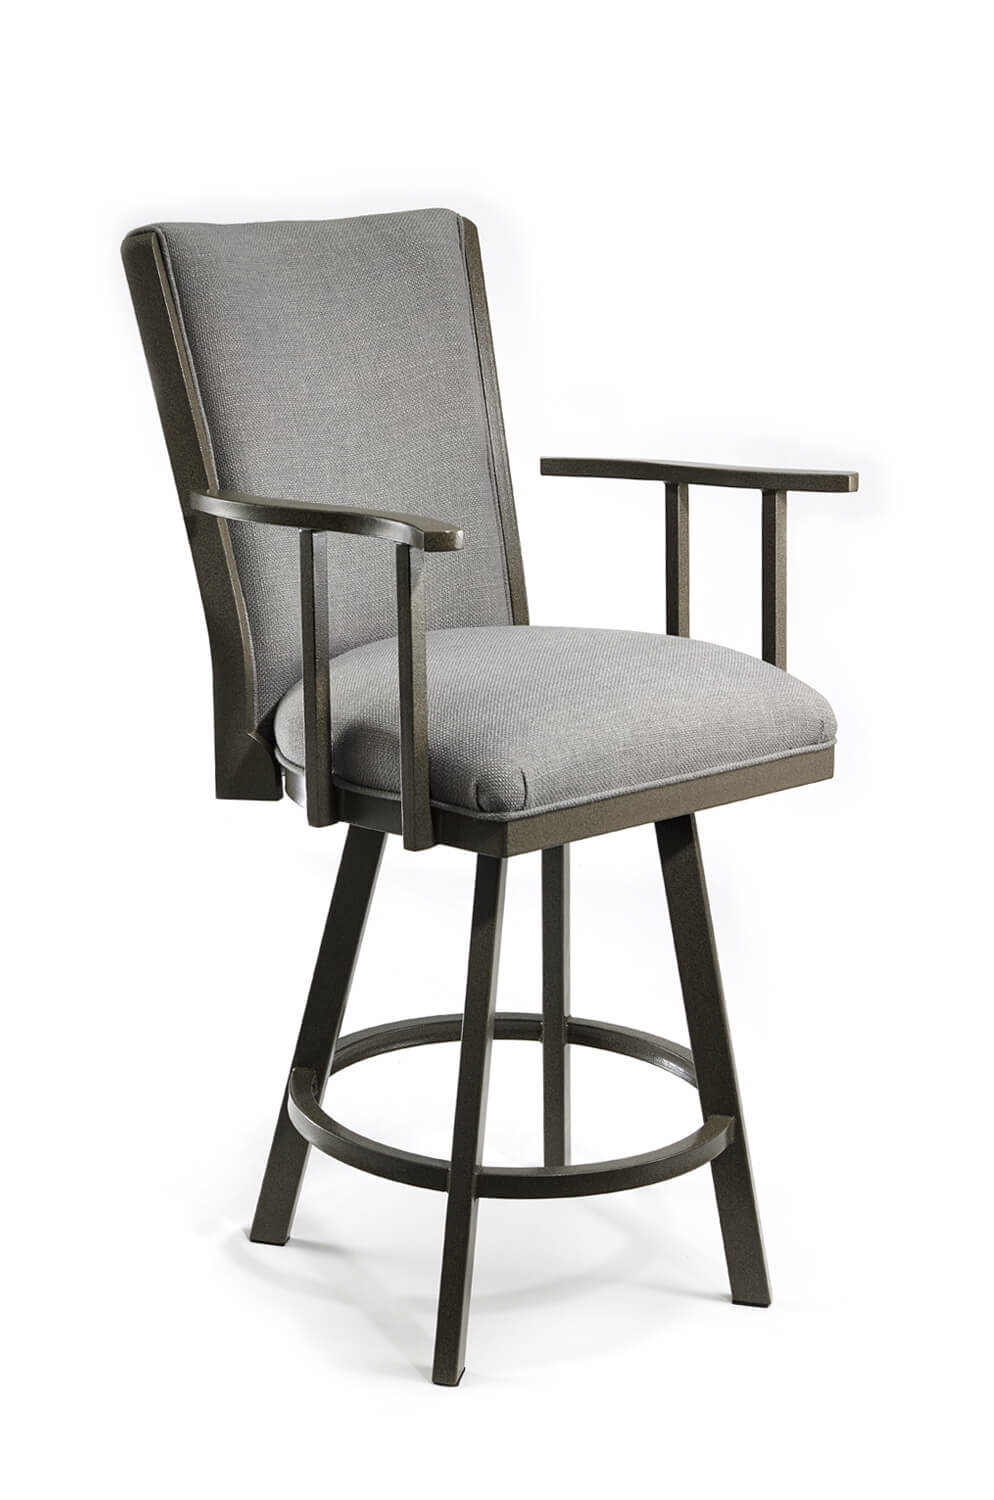 Comfortable Swivel Stool, Bar Stools With Sides